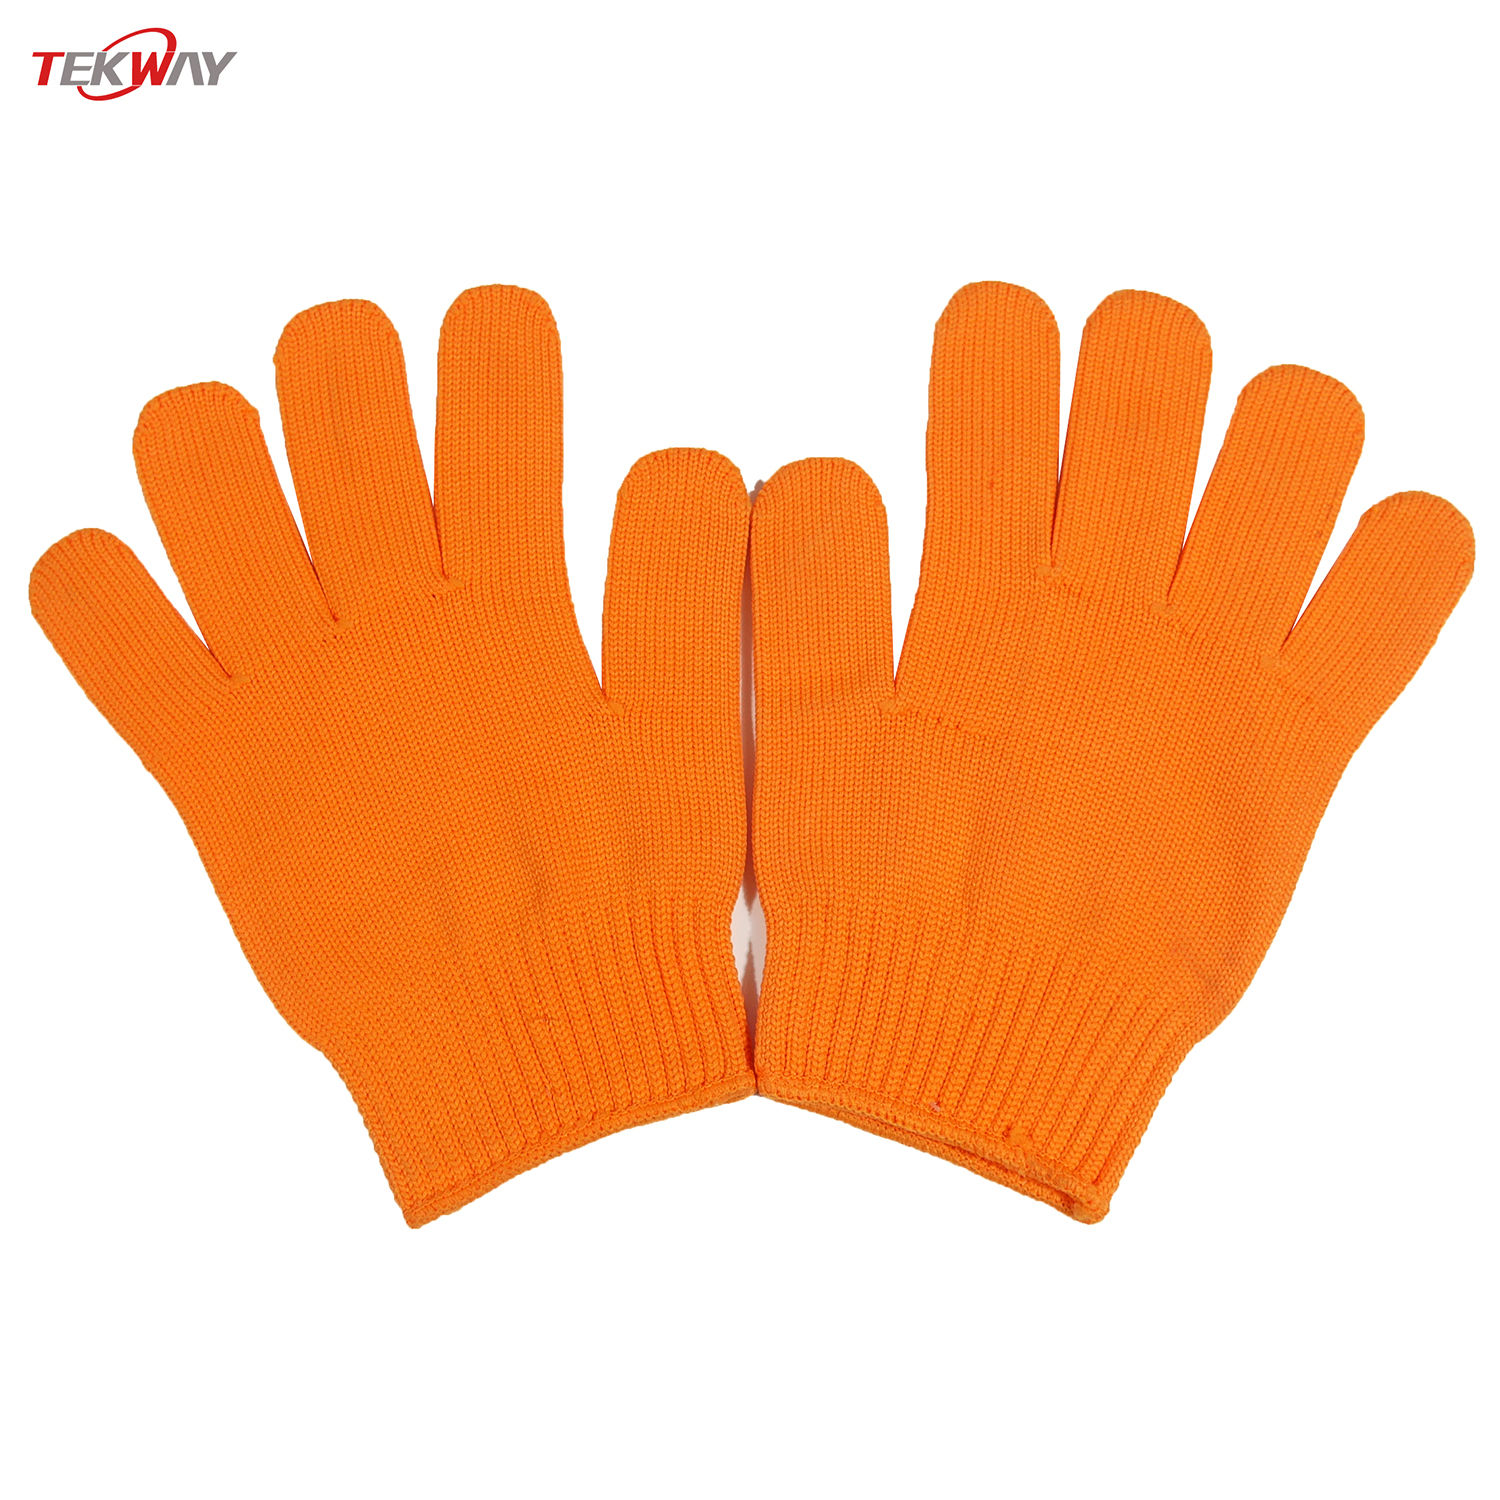 Generic 100pcs - Disposable Nylon Hand Gloves Protect Your Hands Always